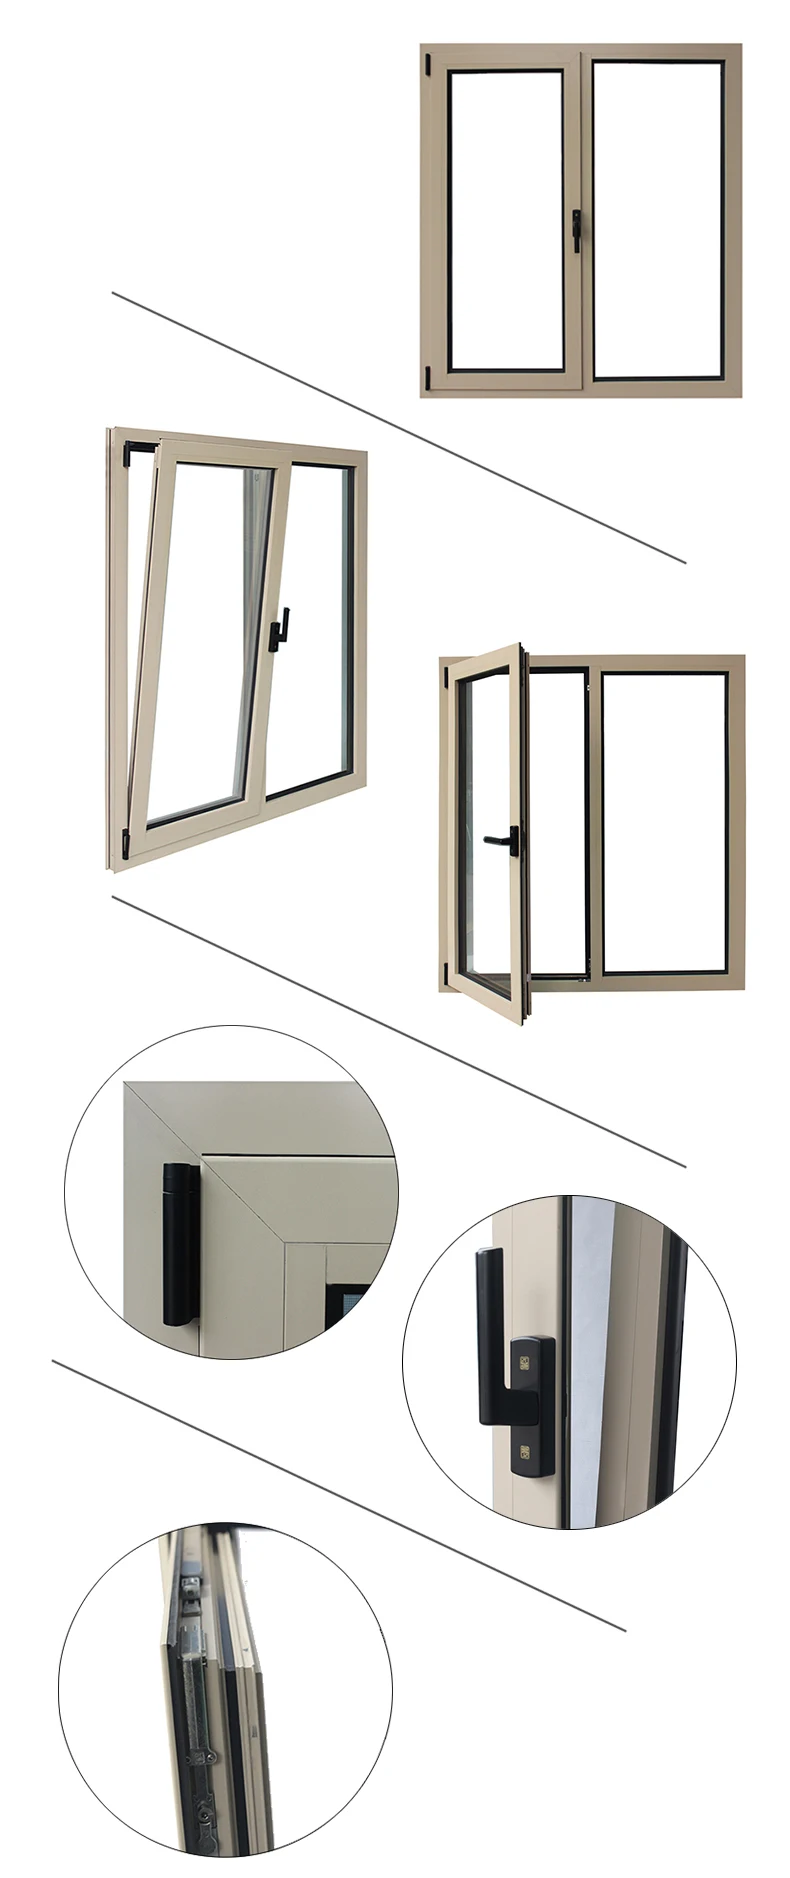 NFRC AS2047 standard made to size aluminium tilt and turn windows